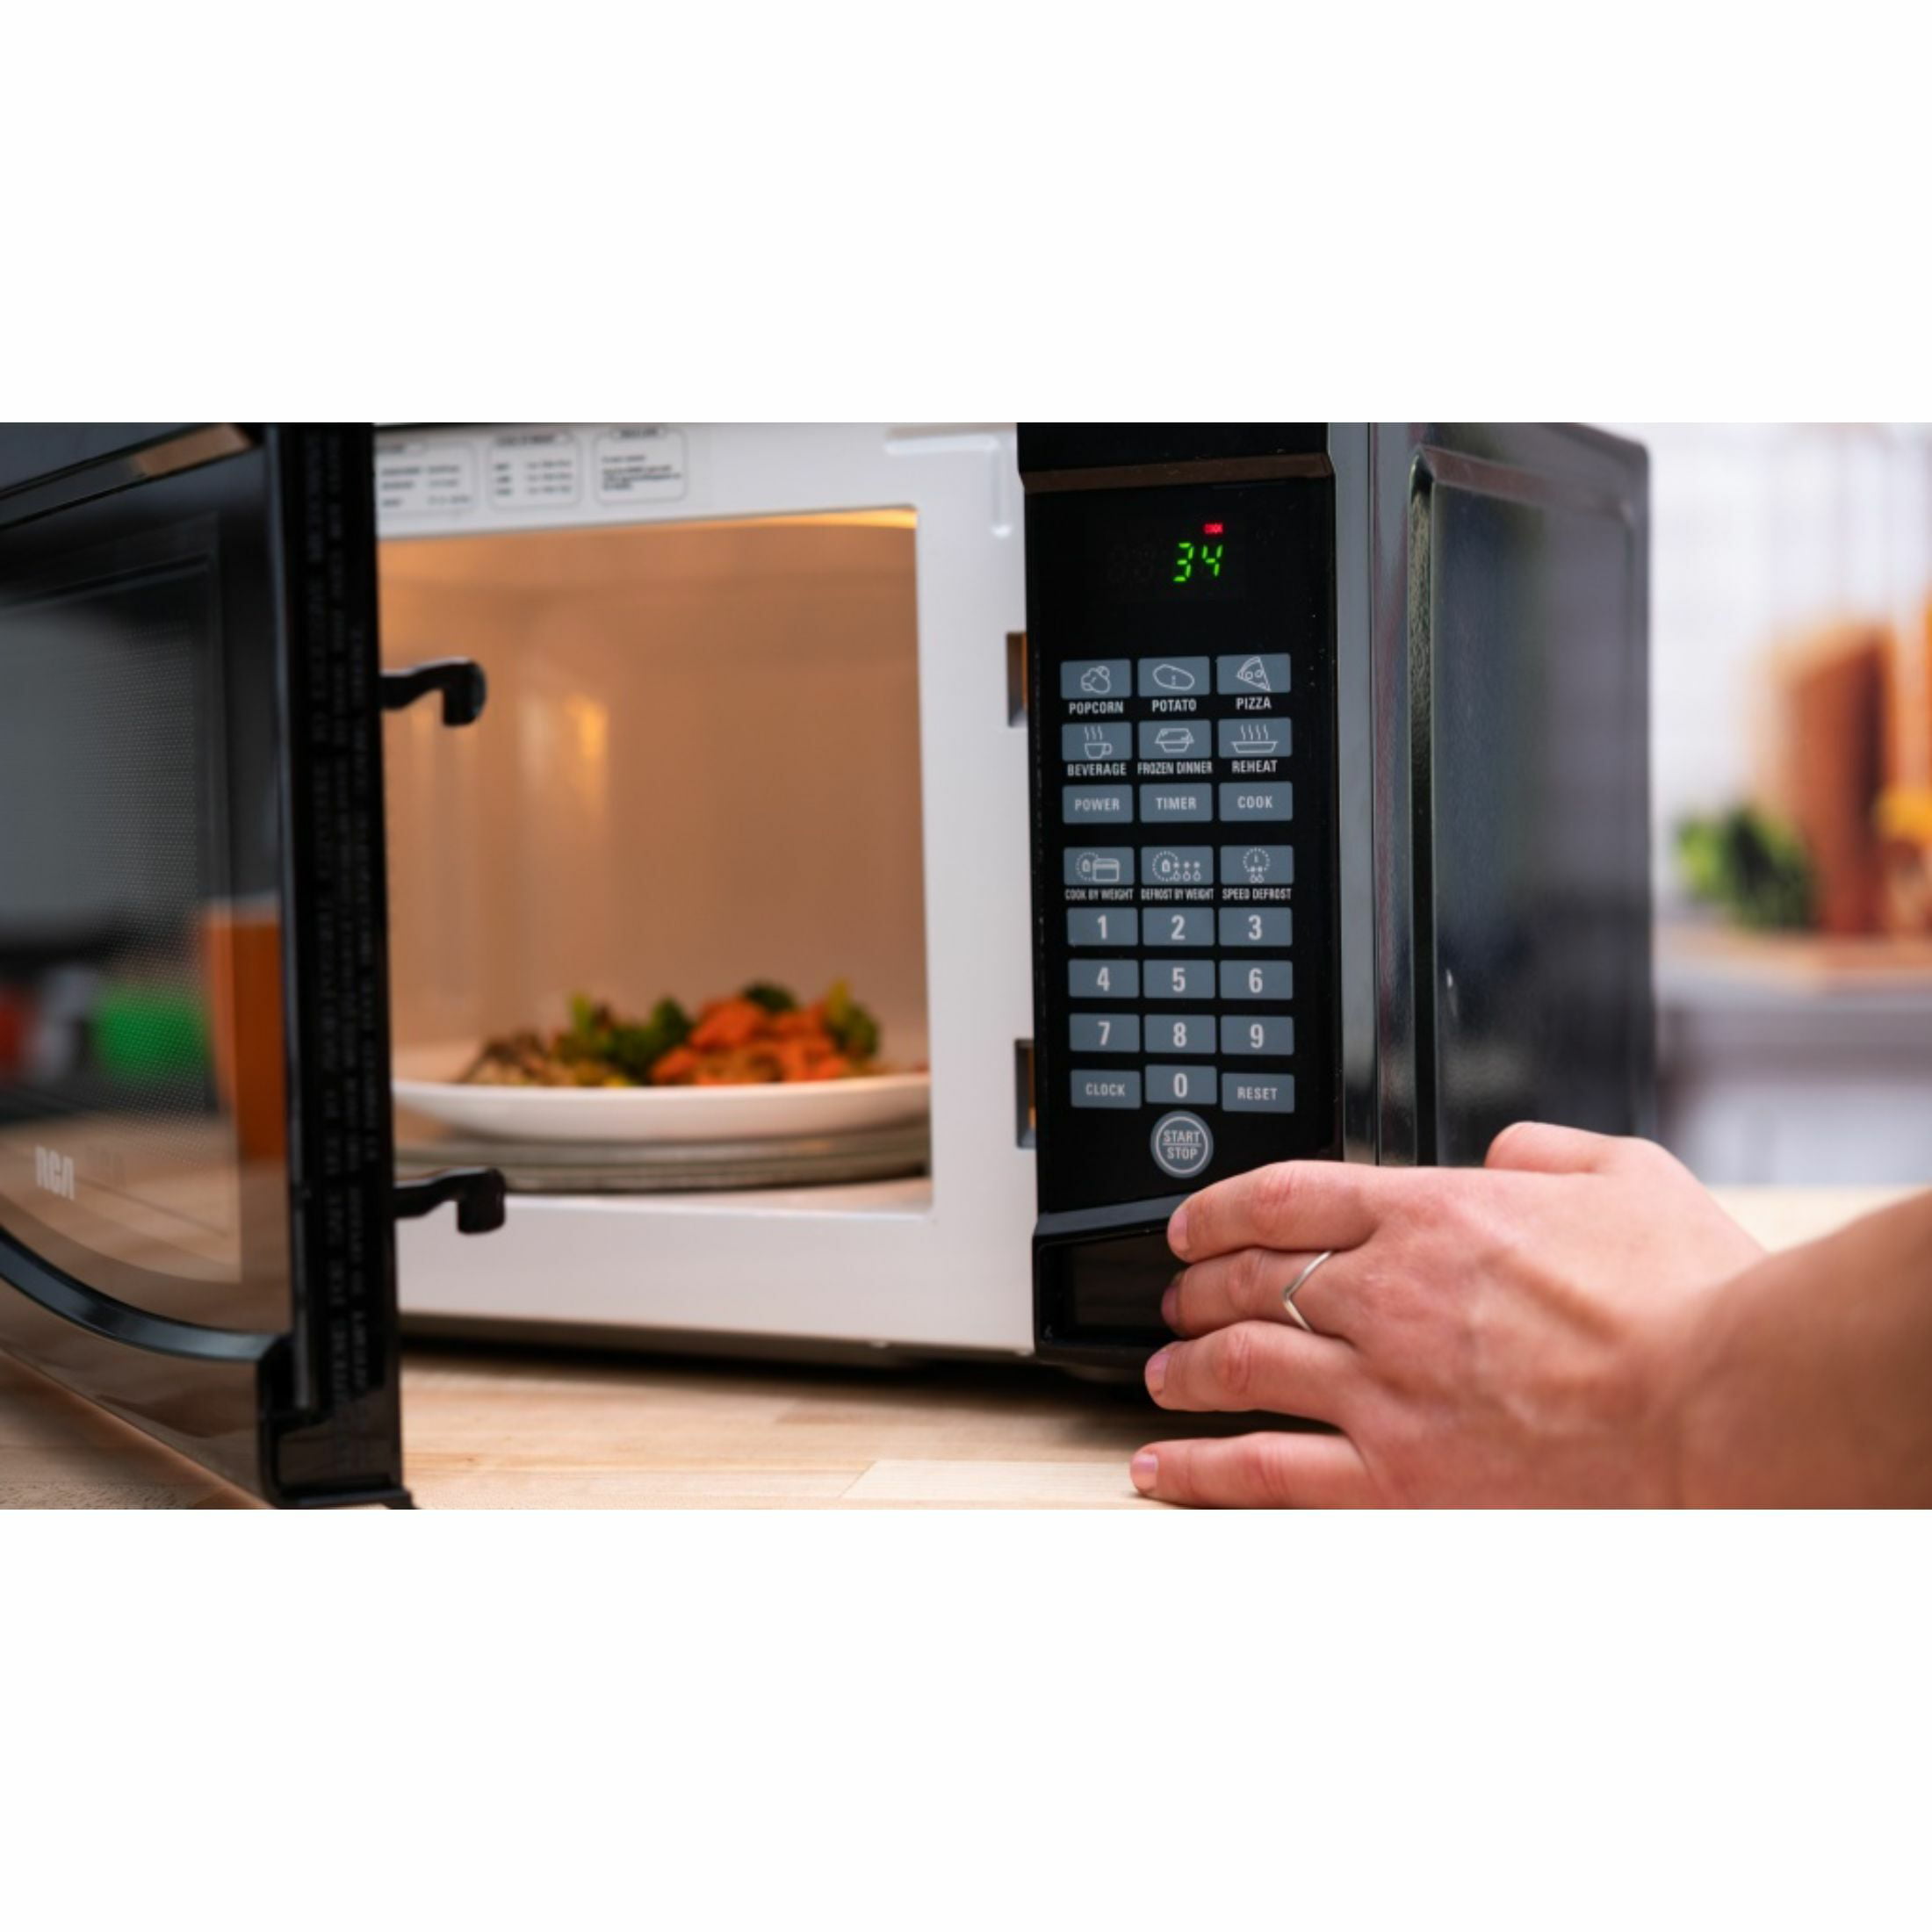 RCA 0.7 Cu. ft. Countertop Microwave in White